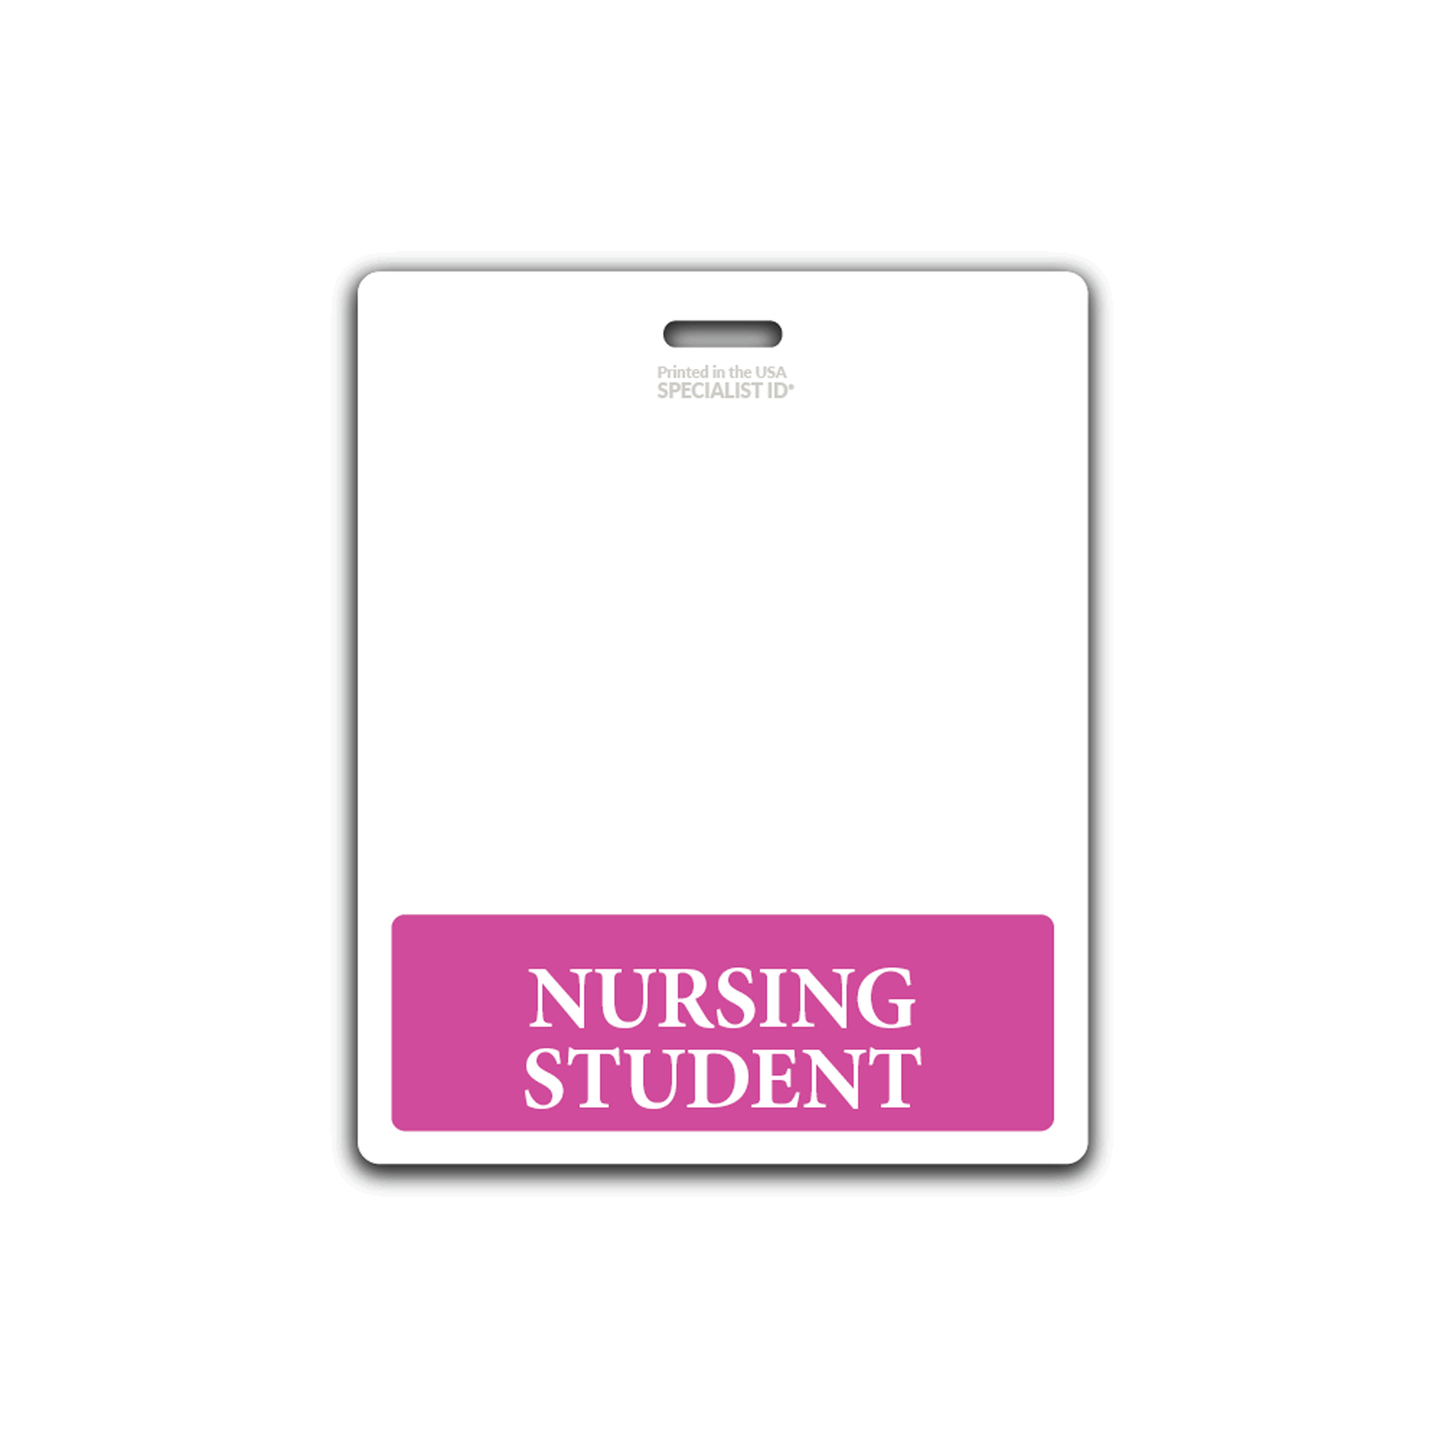 A white badge with a pink strip at the bottom reading "NURSING STUDENT" in white text, perfect for those enrolled in nursing education programs. This Oversized NURSING STUDENT Badge Buddy - XL Badge Backer for Nursing Students - Horizontal Hospital ID Badge Buddies is easily recognizable in clinical settings.